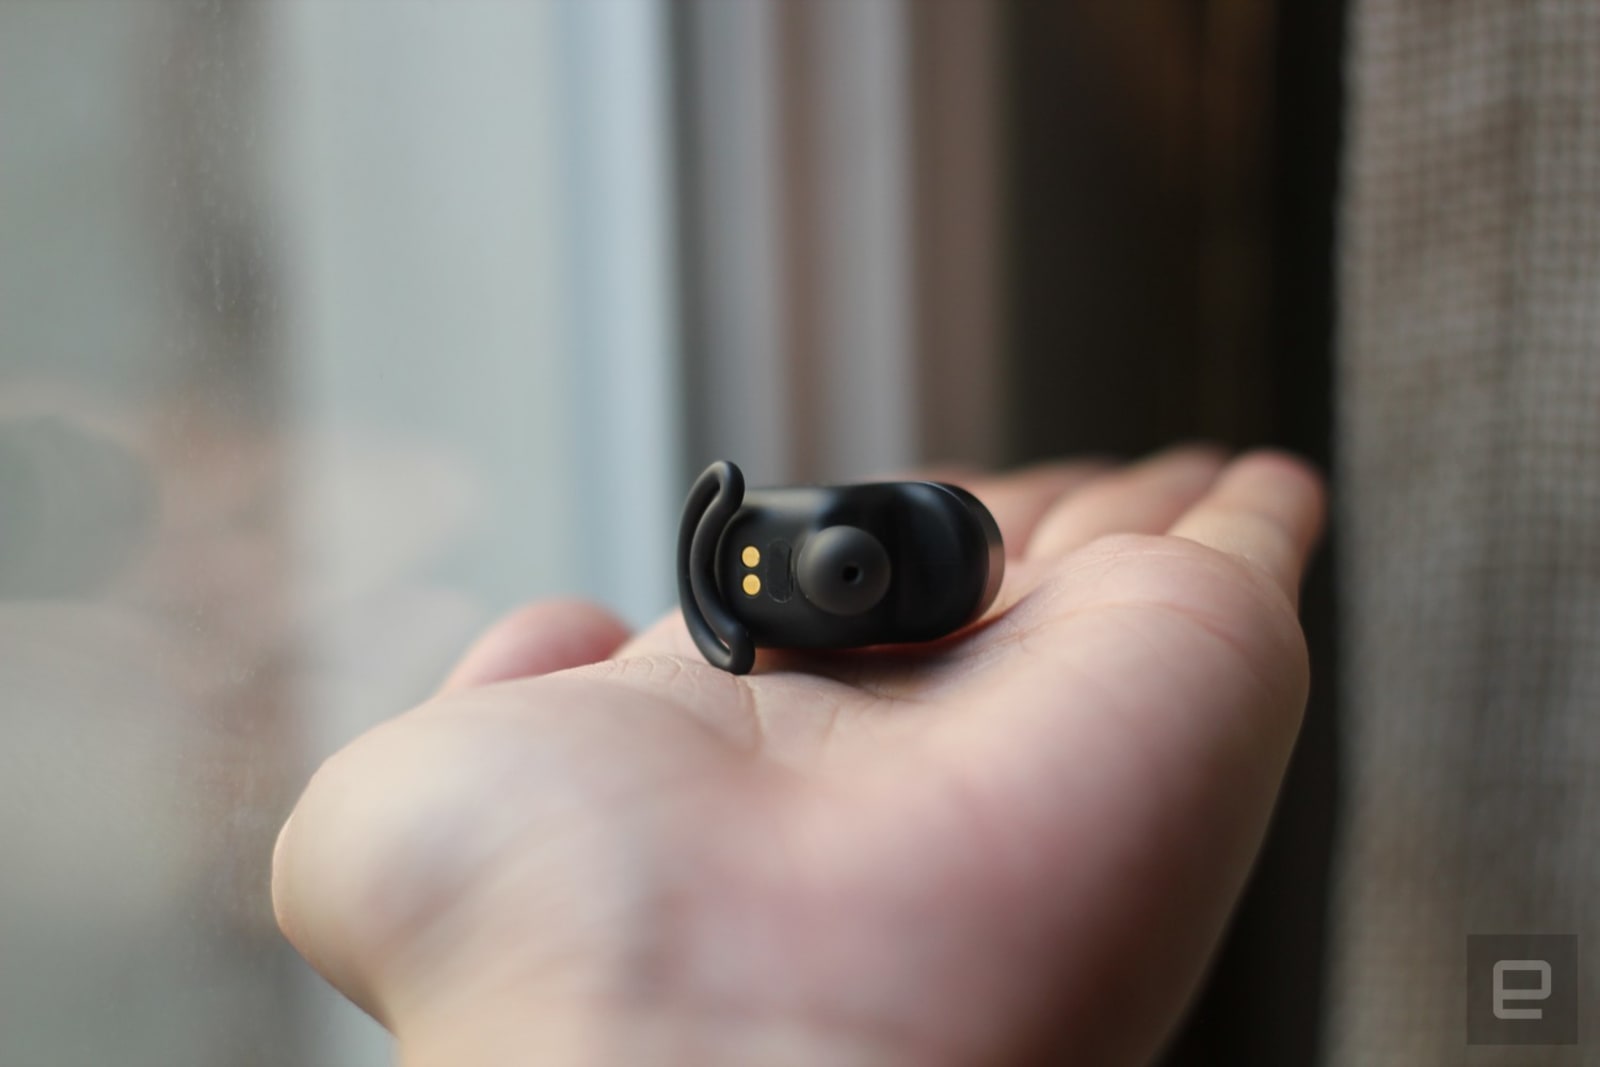 zingen regelmatig criticus Sony's Xperia Ear is not the hands-free assistant I wanted | Engadget